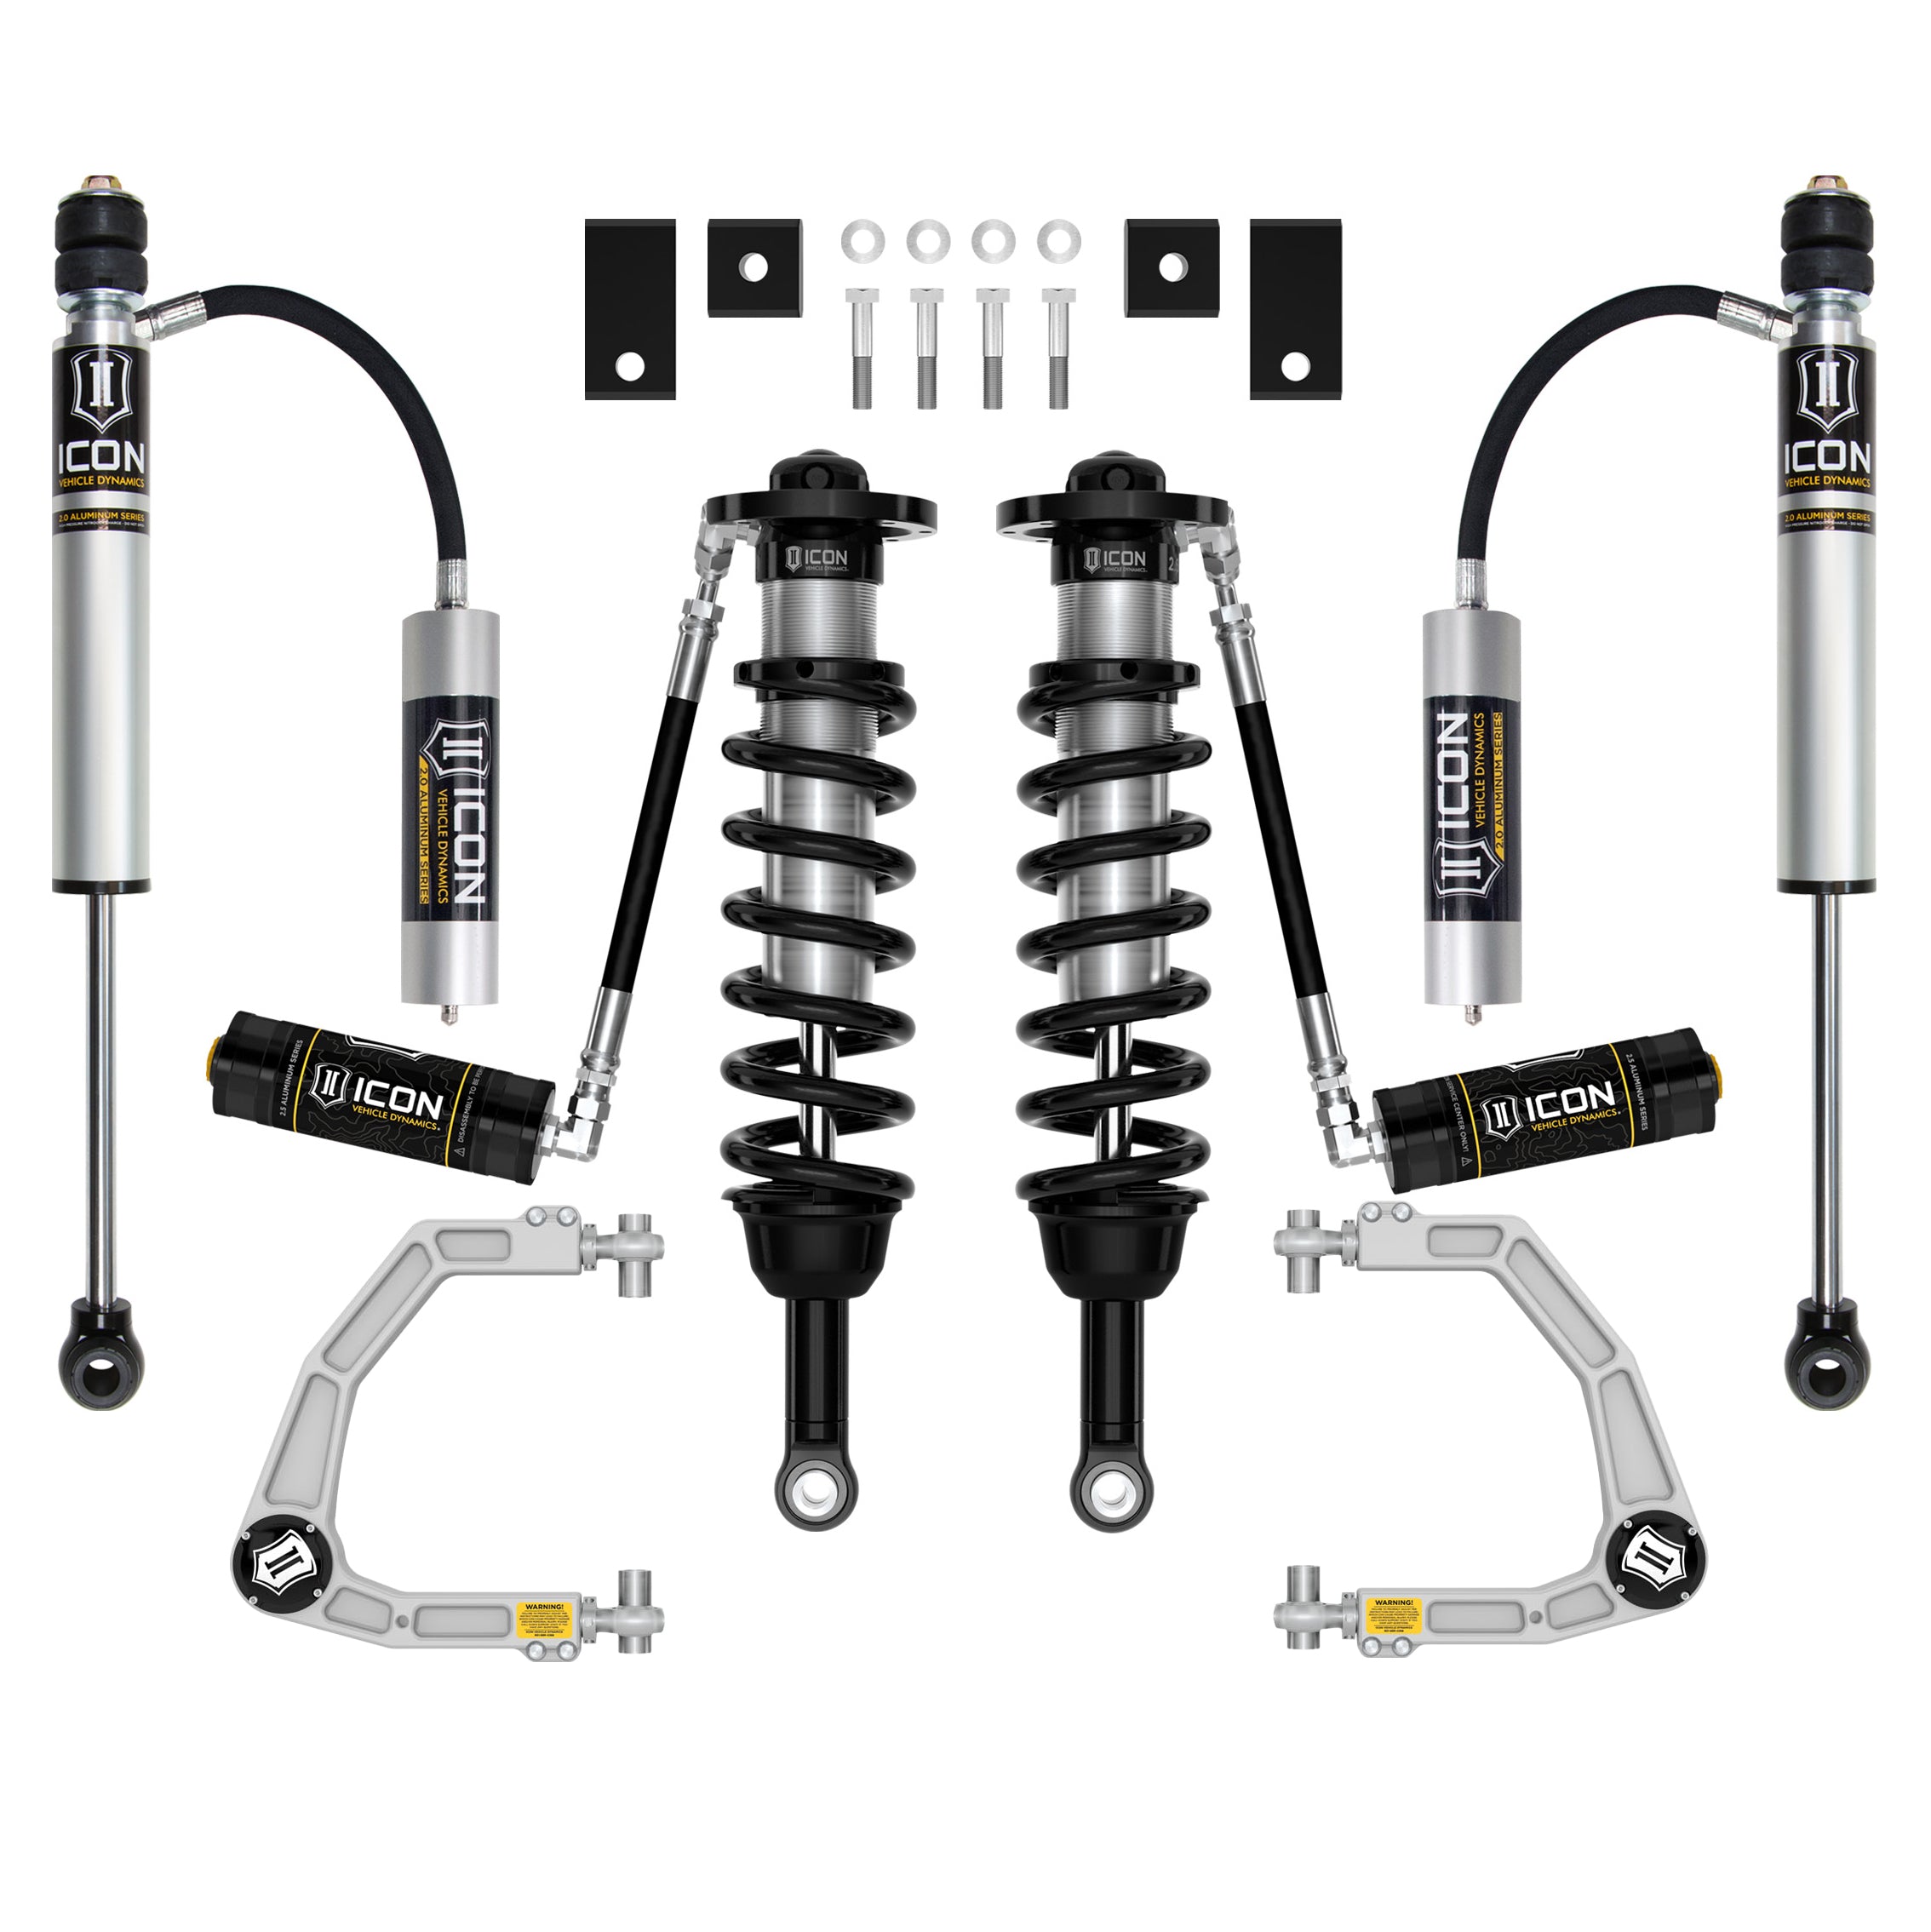 22-23 Toyota Tundra Icon Stage 6 Billet Suspension System parts